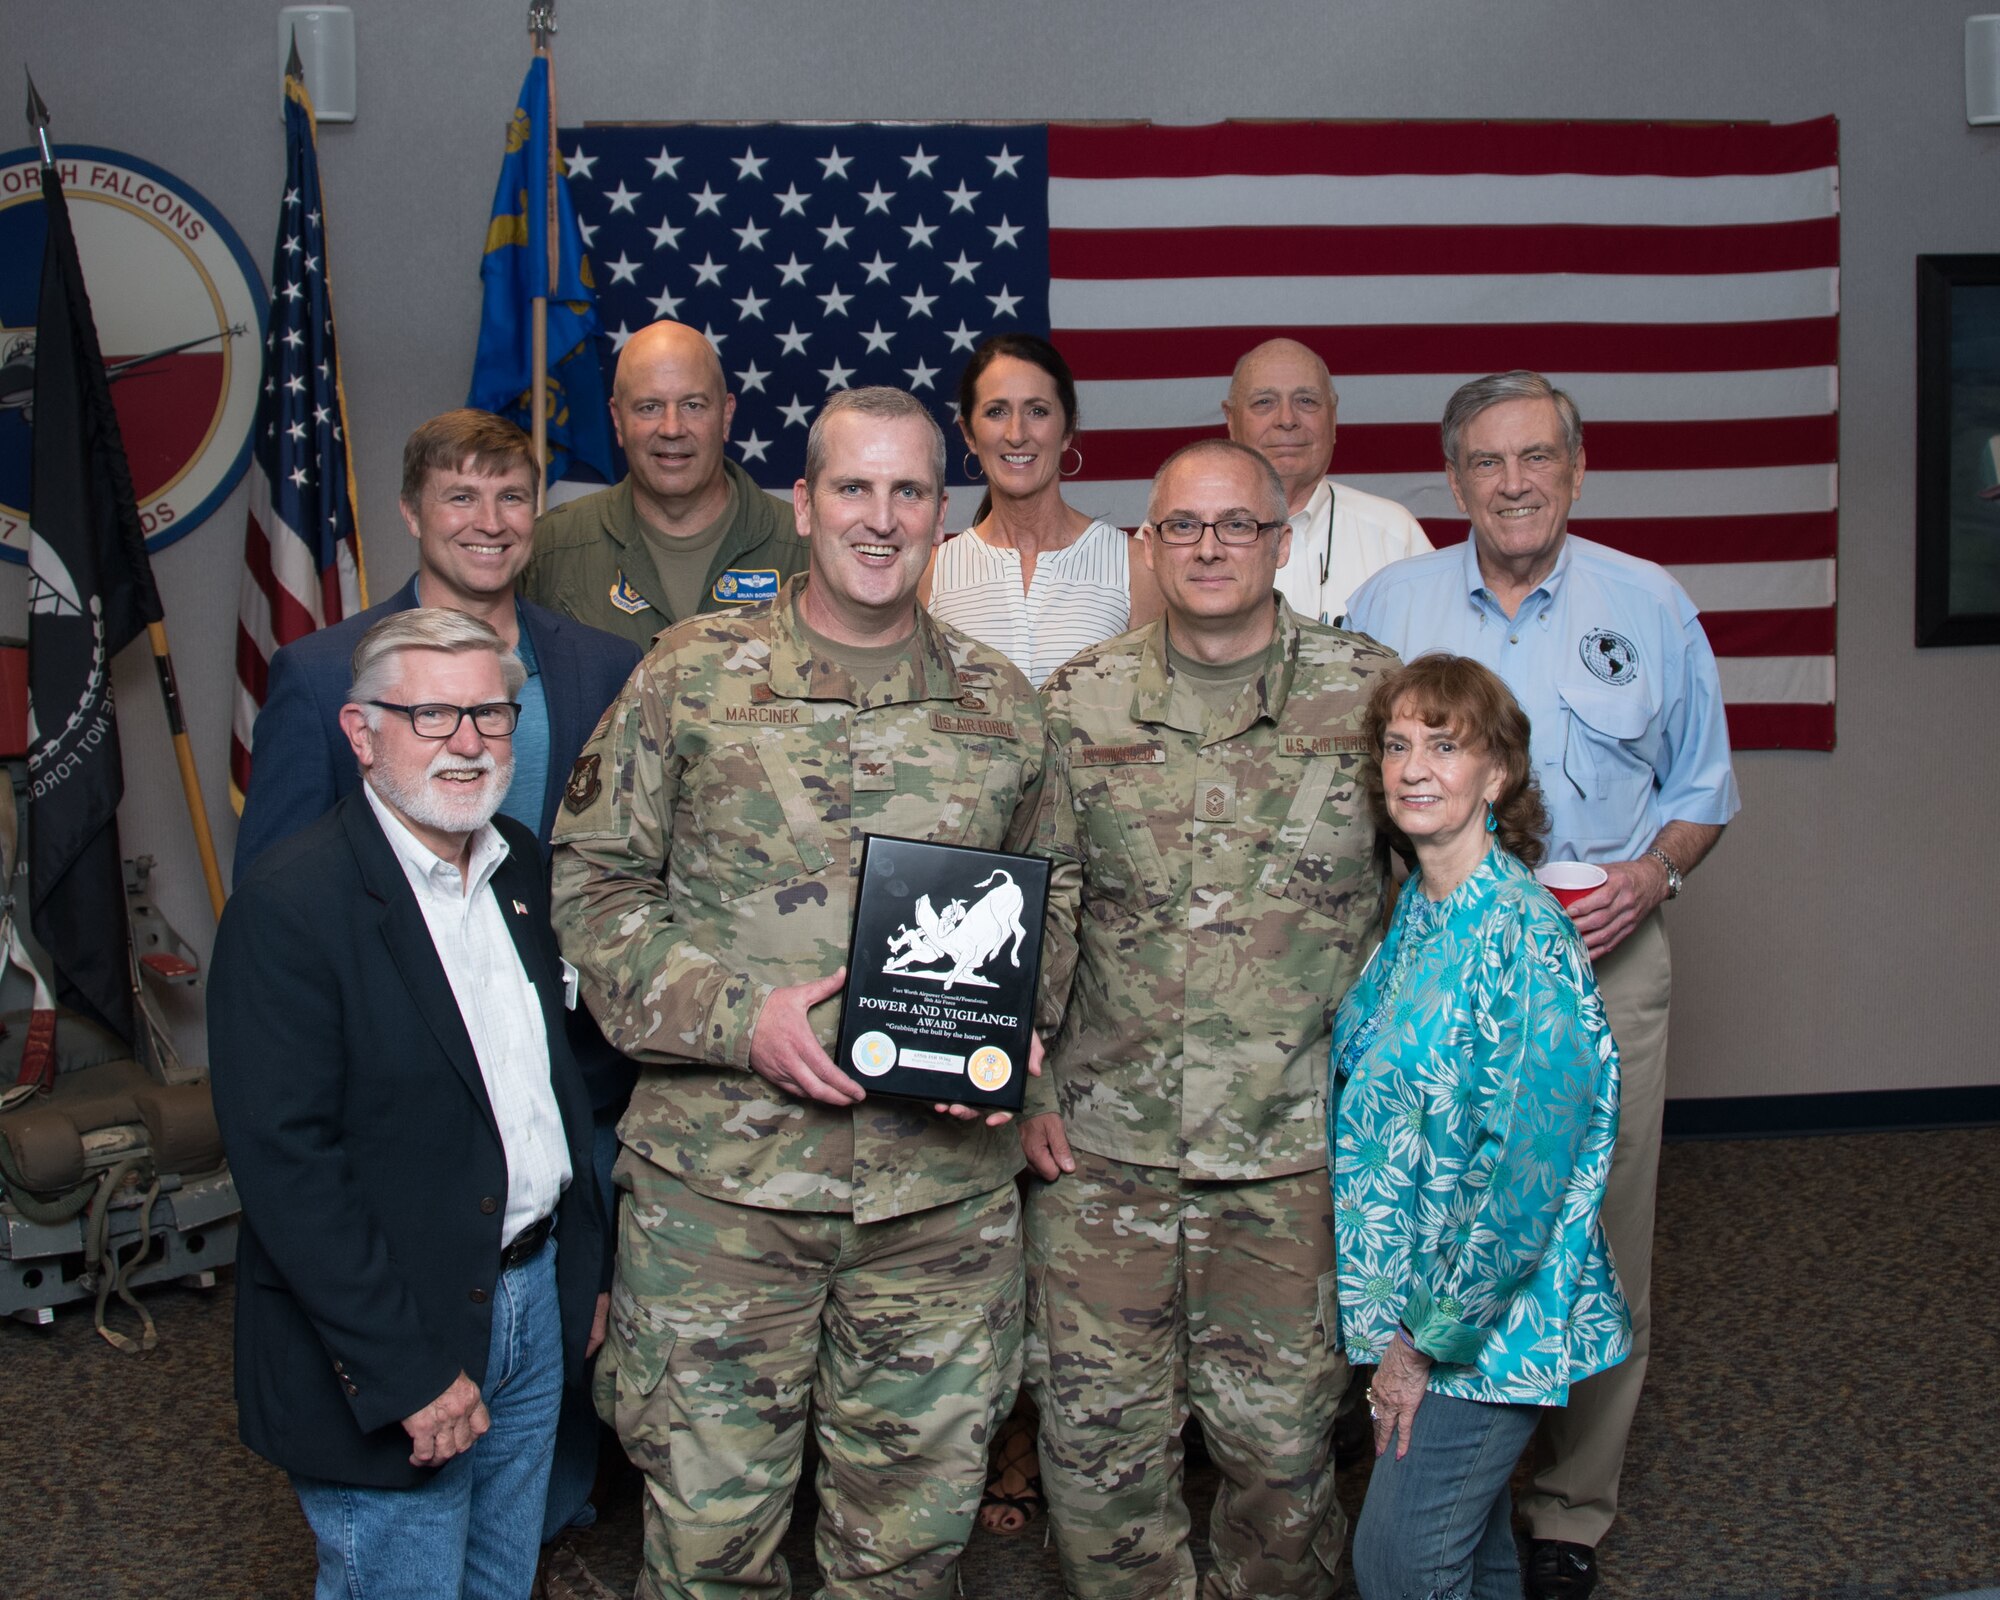 Maj. Gen. Brian Borgen, Tenth Air Force Commander and Chief Master Sgt. Jeremy Malcom, Tenth Air Force Command Chief, present the Power and Vigilance Award to Col. Joseph Marcinek, 655th Intelligence, Surveillance, and Reconnaissance Wing Commander and Chief Master Sgt. Bohdan Pywowarczuk II, 655th ISRW Command Chief.